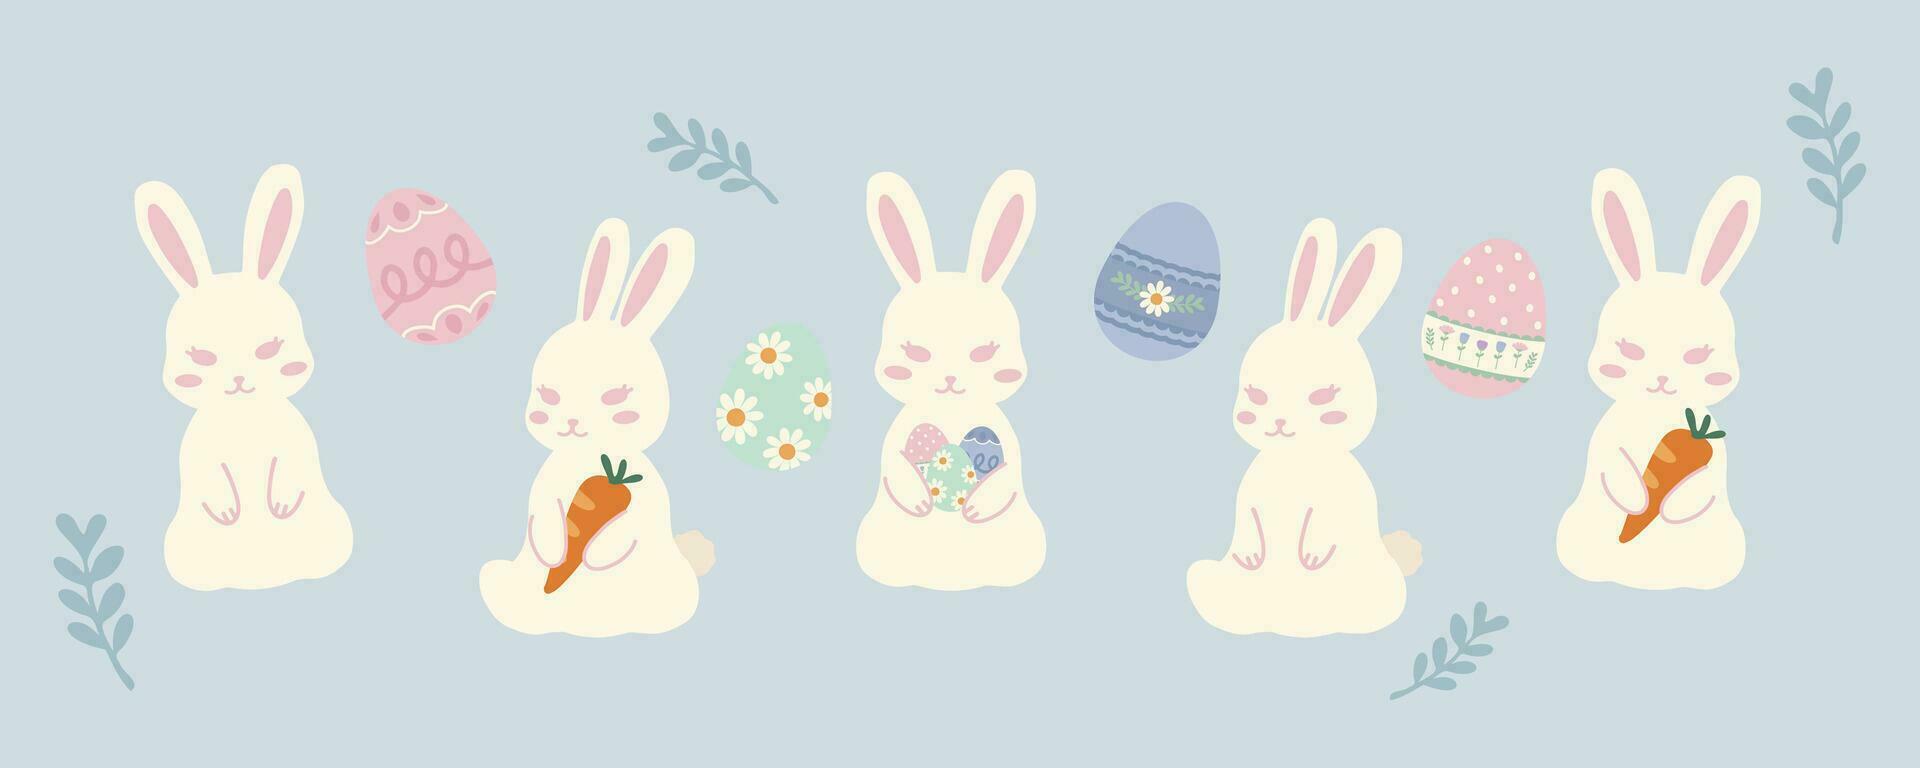 Hand drawn illustration set of cute easter bunny rabbit in different poses and easter eggs decorative elements. For poster, card, scrapbooking , tag, invitation, headboard vector